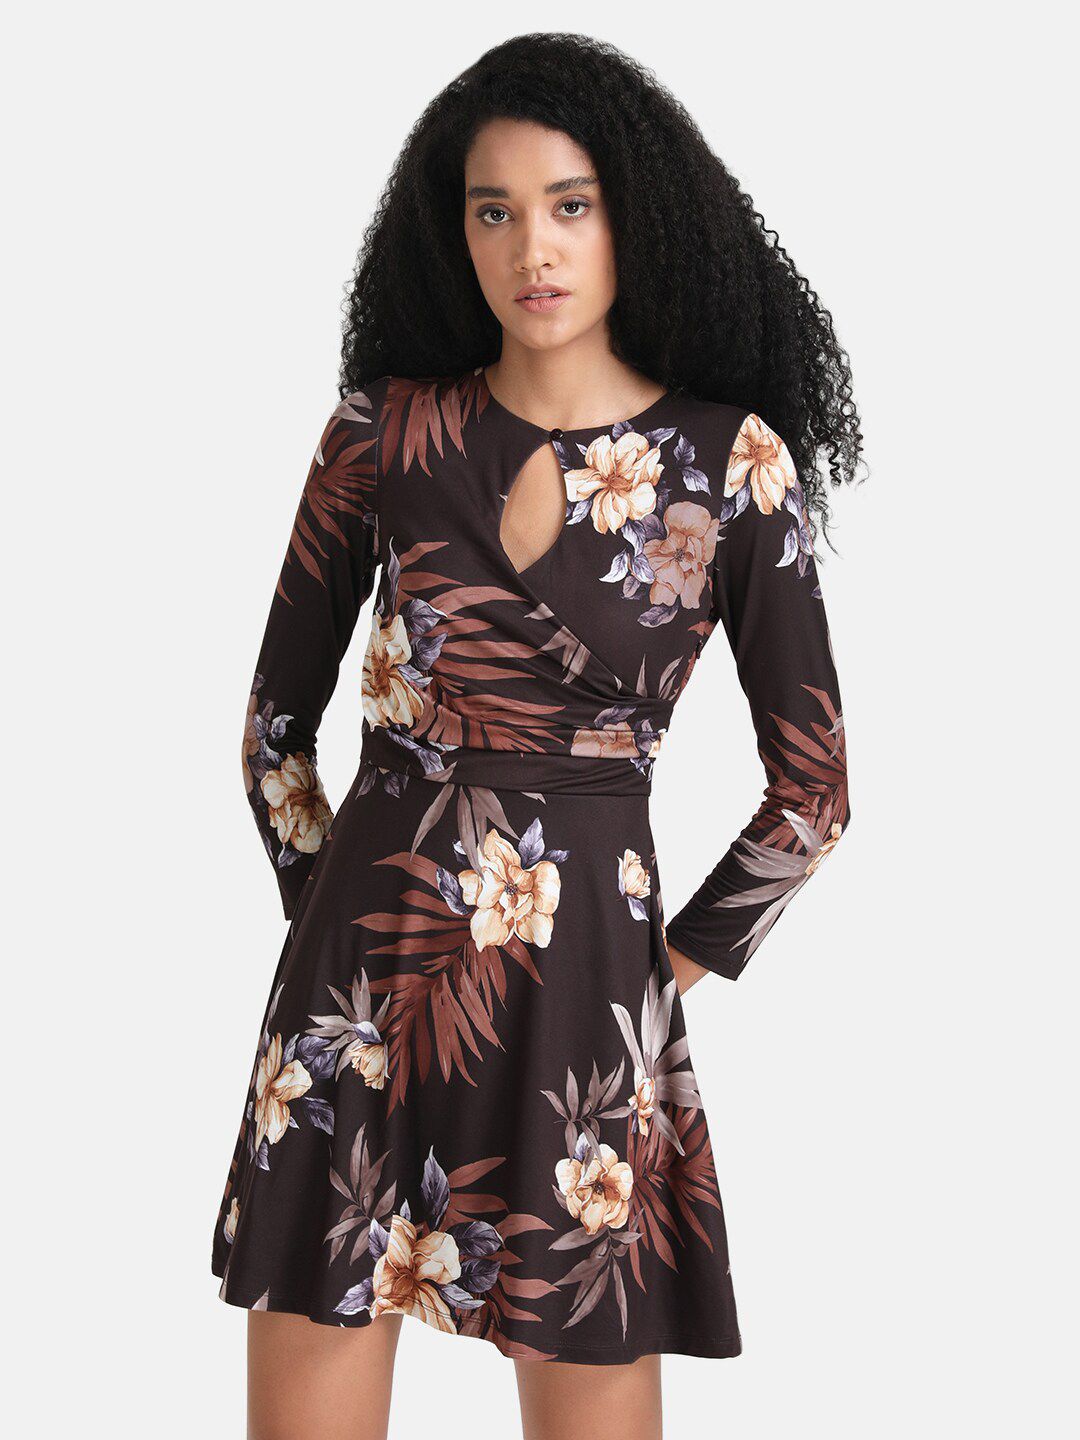 Kazo Brown Floral Keyhole Neck Dress Price in India